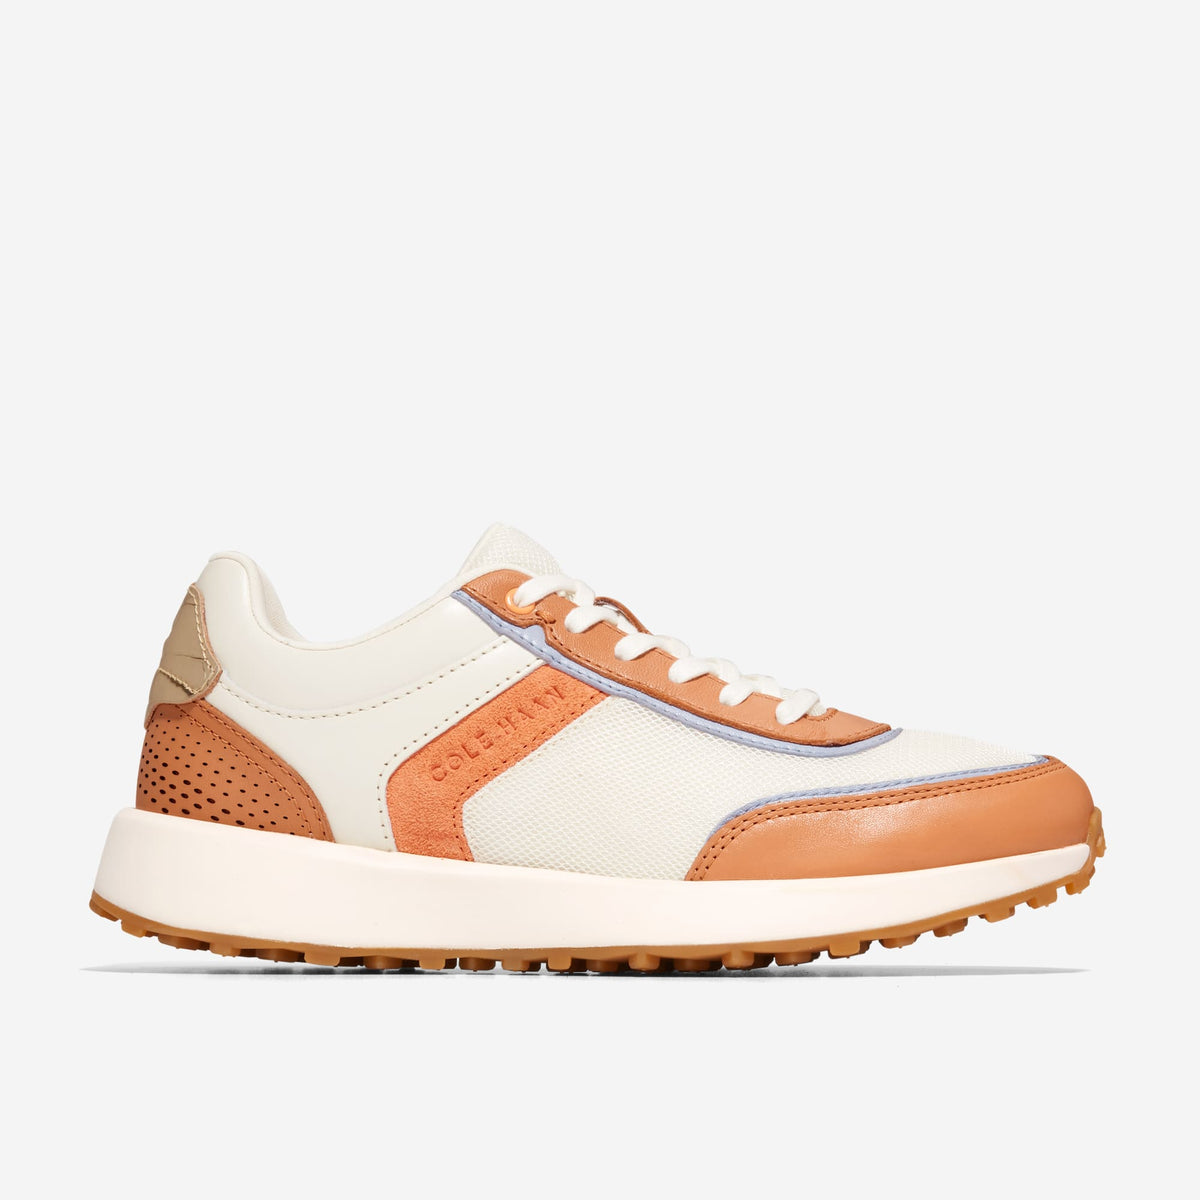 W29137:IVORY/NYLON/CH NATURAL TAN/TANGERINE SUEDE